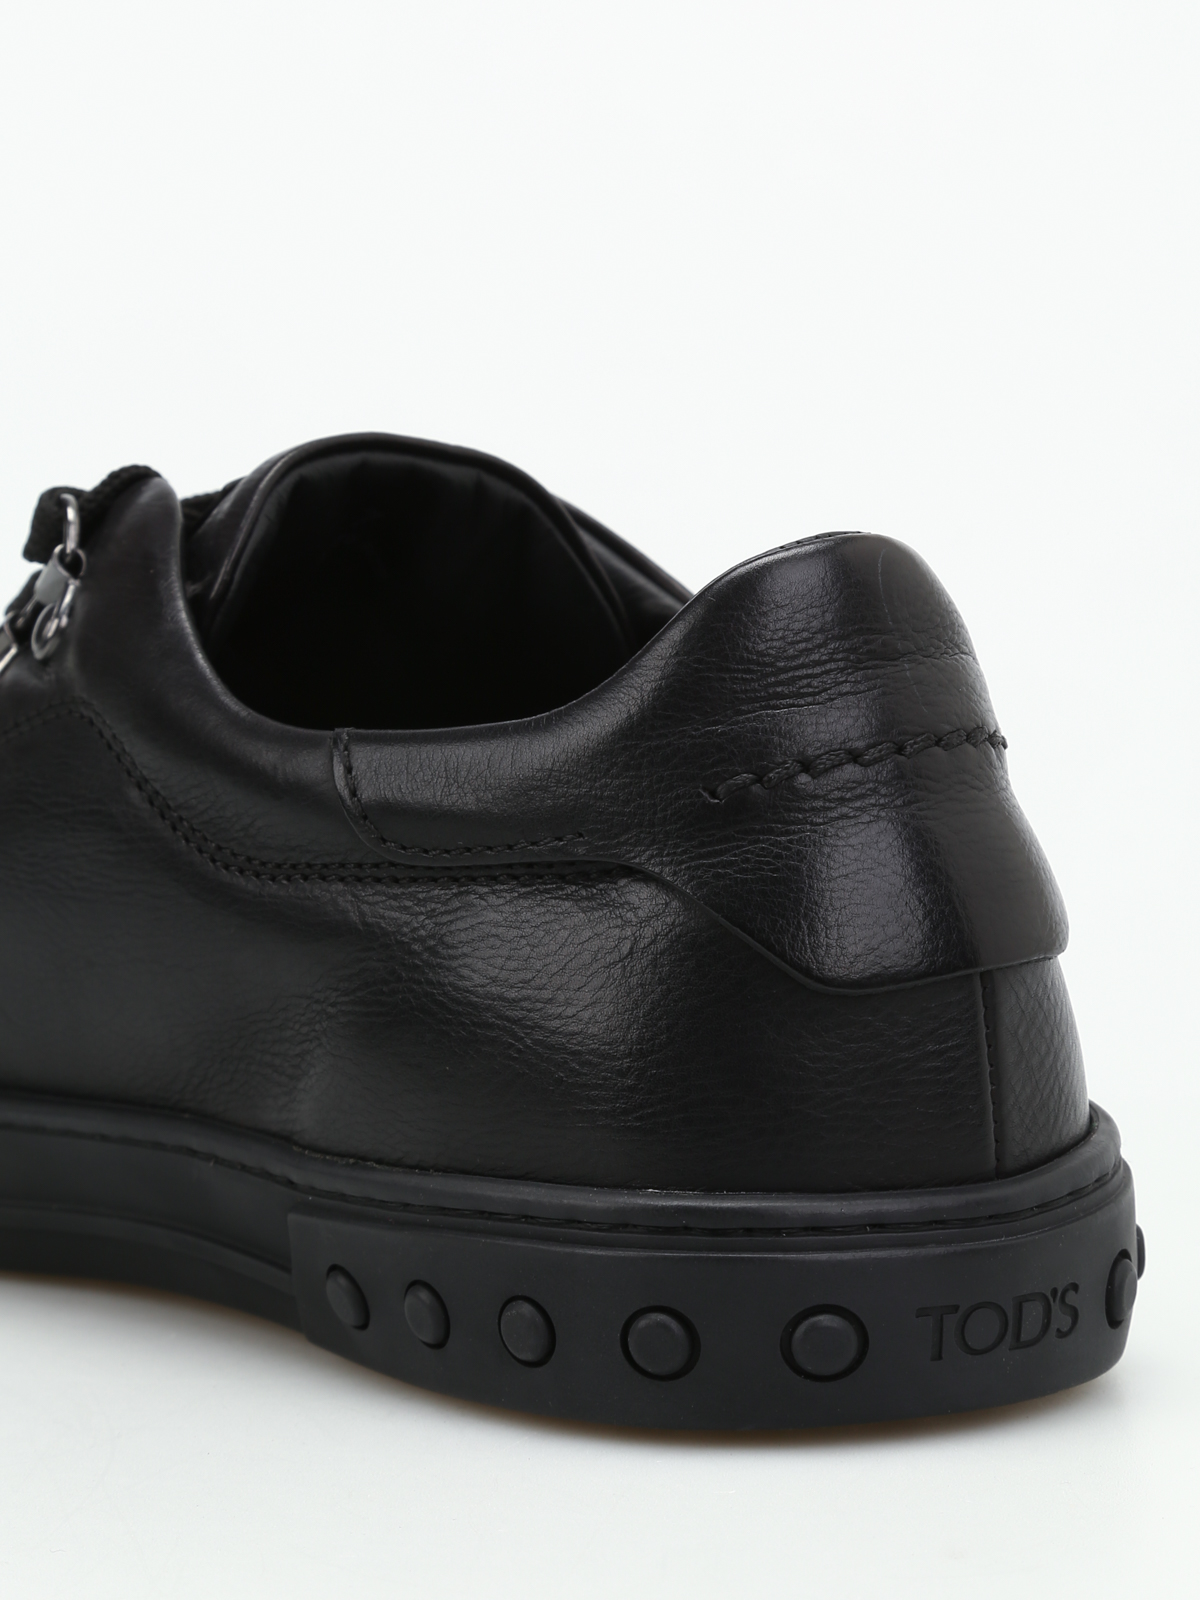 Tod'S - Black leather low-top sneakers 